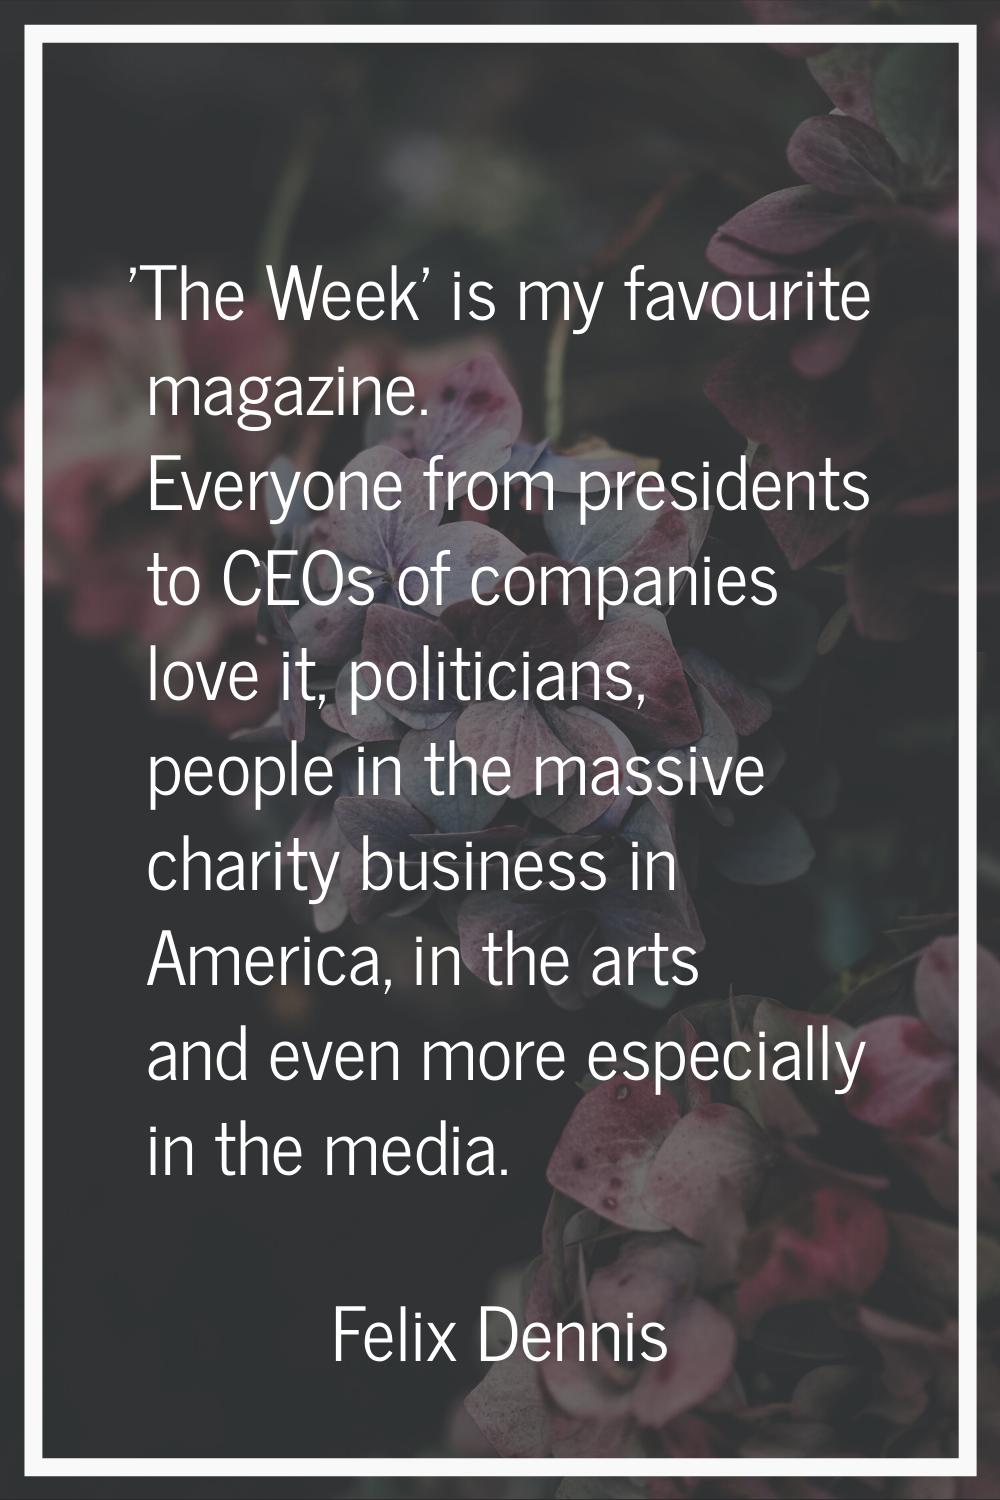 'The Week' is my favourite magazine. Everyone from presidents to CEOs of companies love it, politic